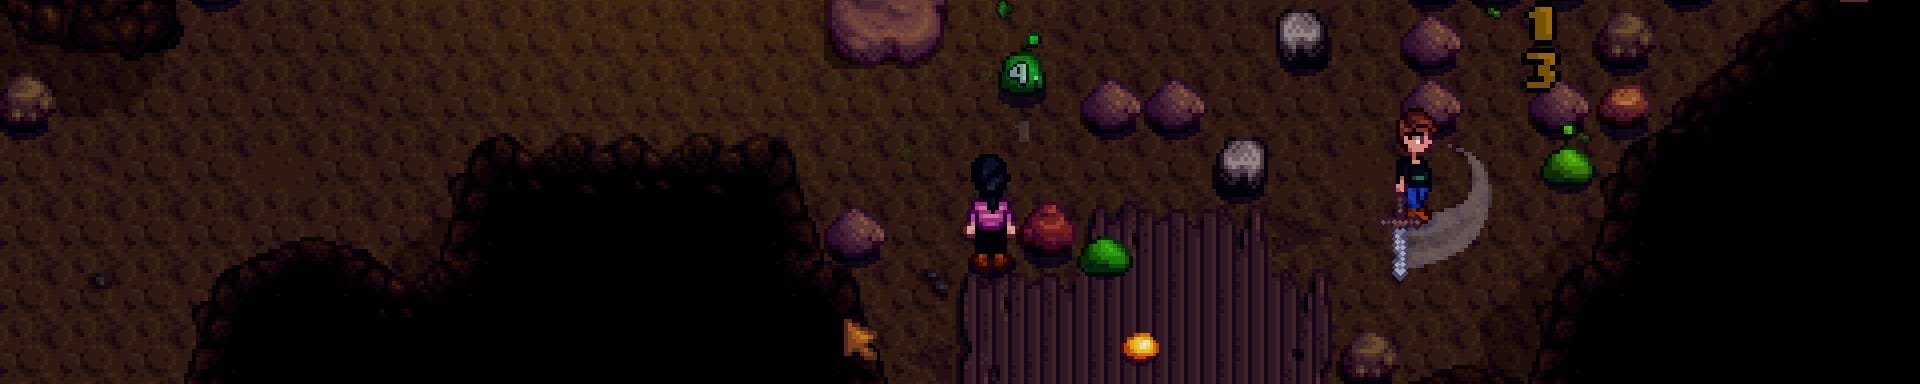 Stardew Valley Multiplayer Guide Mines Fight